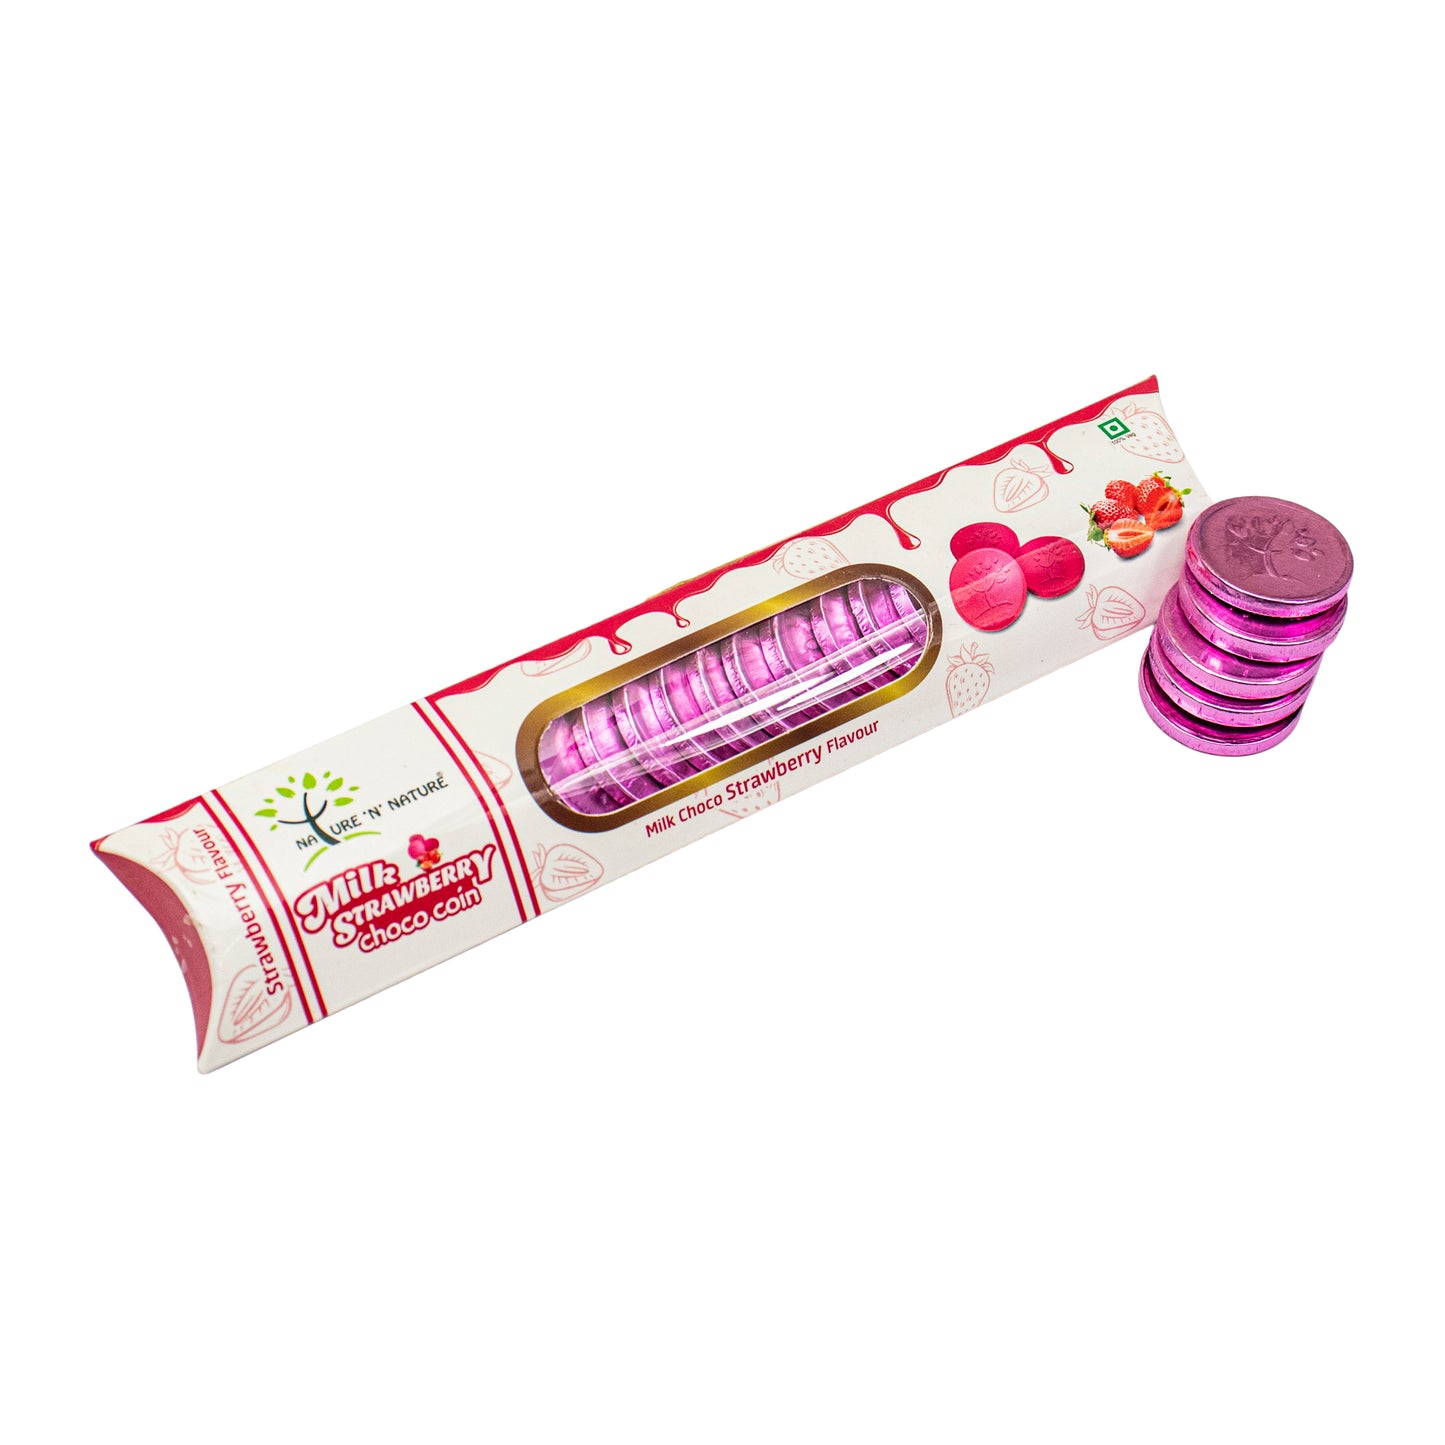 NATURE 'N' NATURE Pink Coin STRAWBERRY Milk Chocolate, 45 Grams Pink Coin Chocolate Strip pack, Pack Of 3